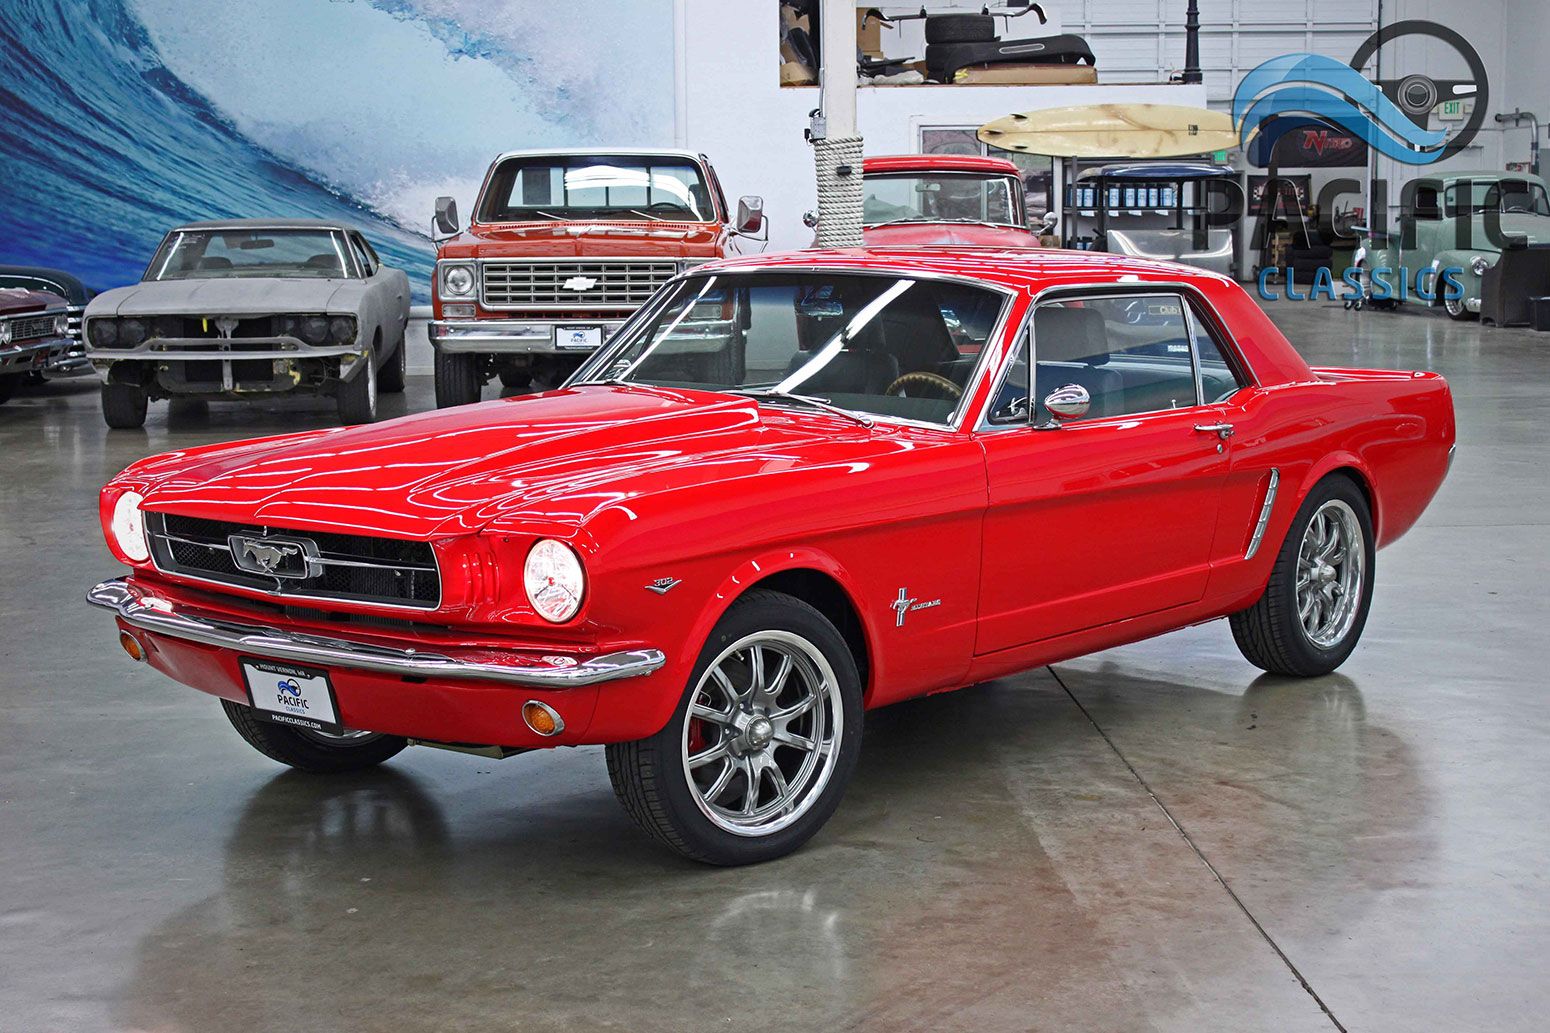 A Mustang restoration requires a garage and automotive tools